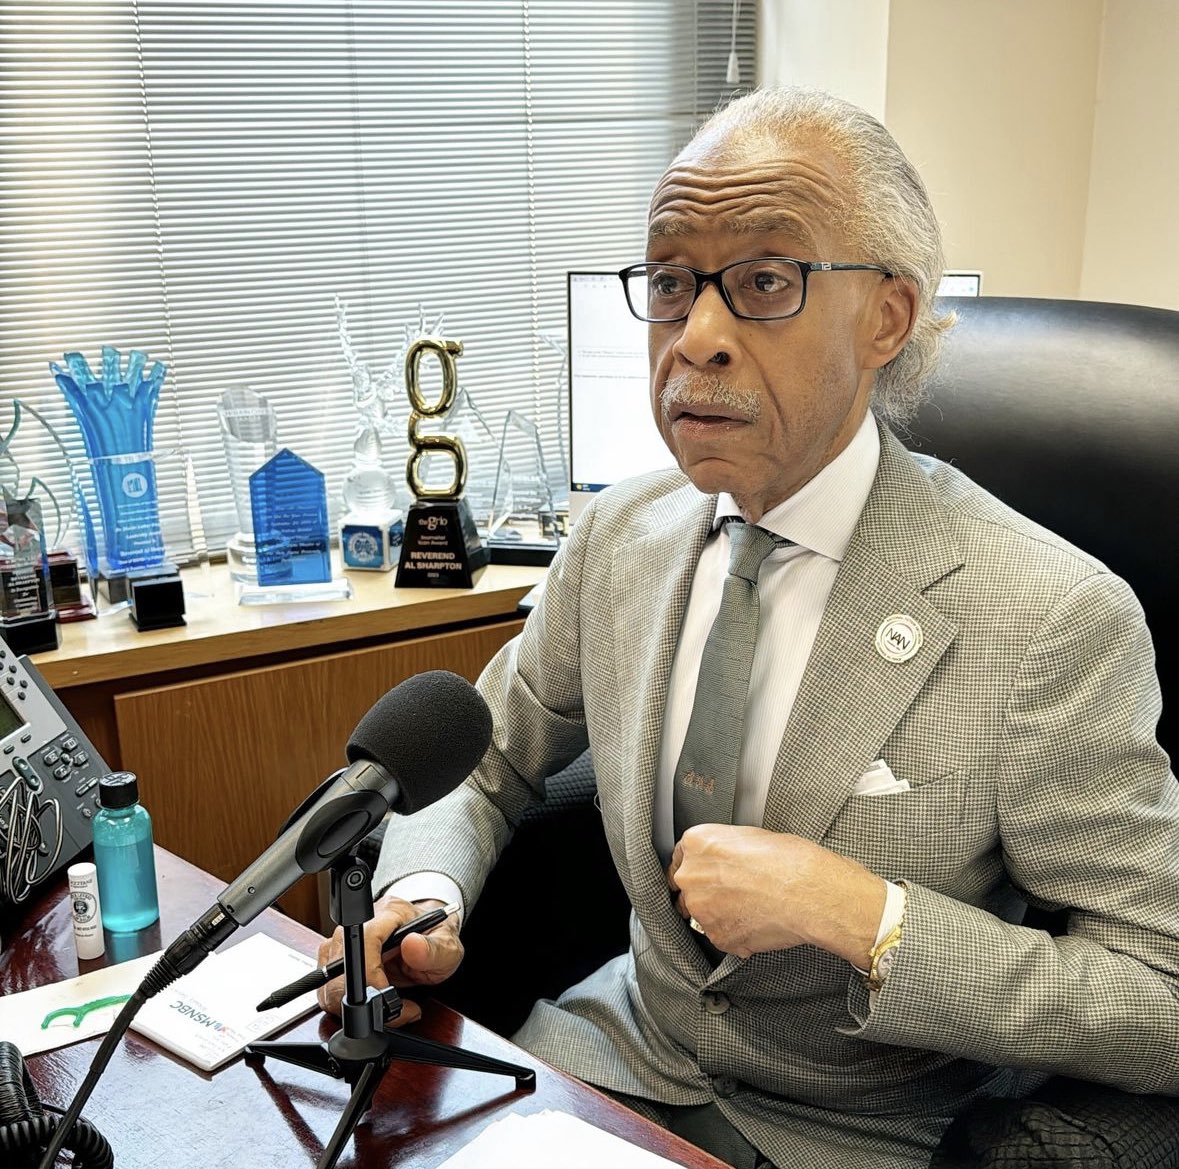 Live from NAN Corporate hosting Keeping it Real w/ Al Sharpton from 1-4 pm/et on local stations and SIRIUS XM 126. Call in at 877 532 5797. woldcnews.com/listen-live/